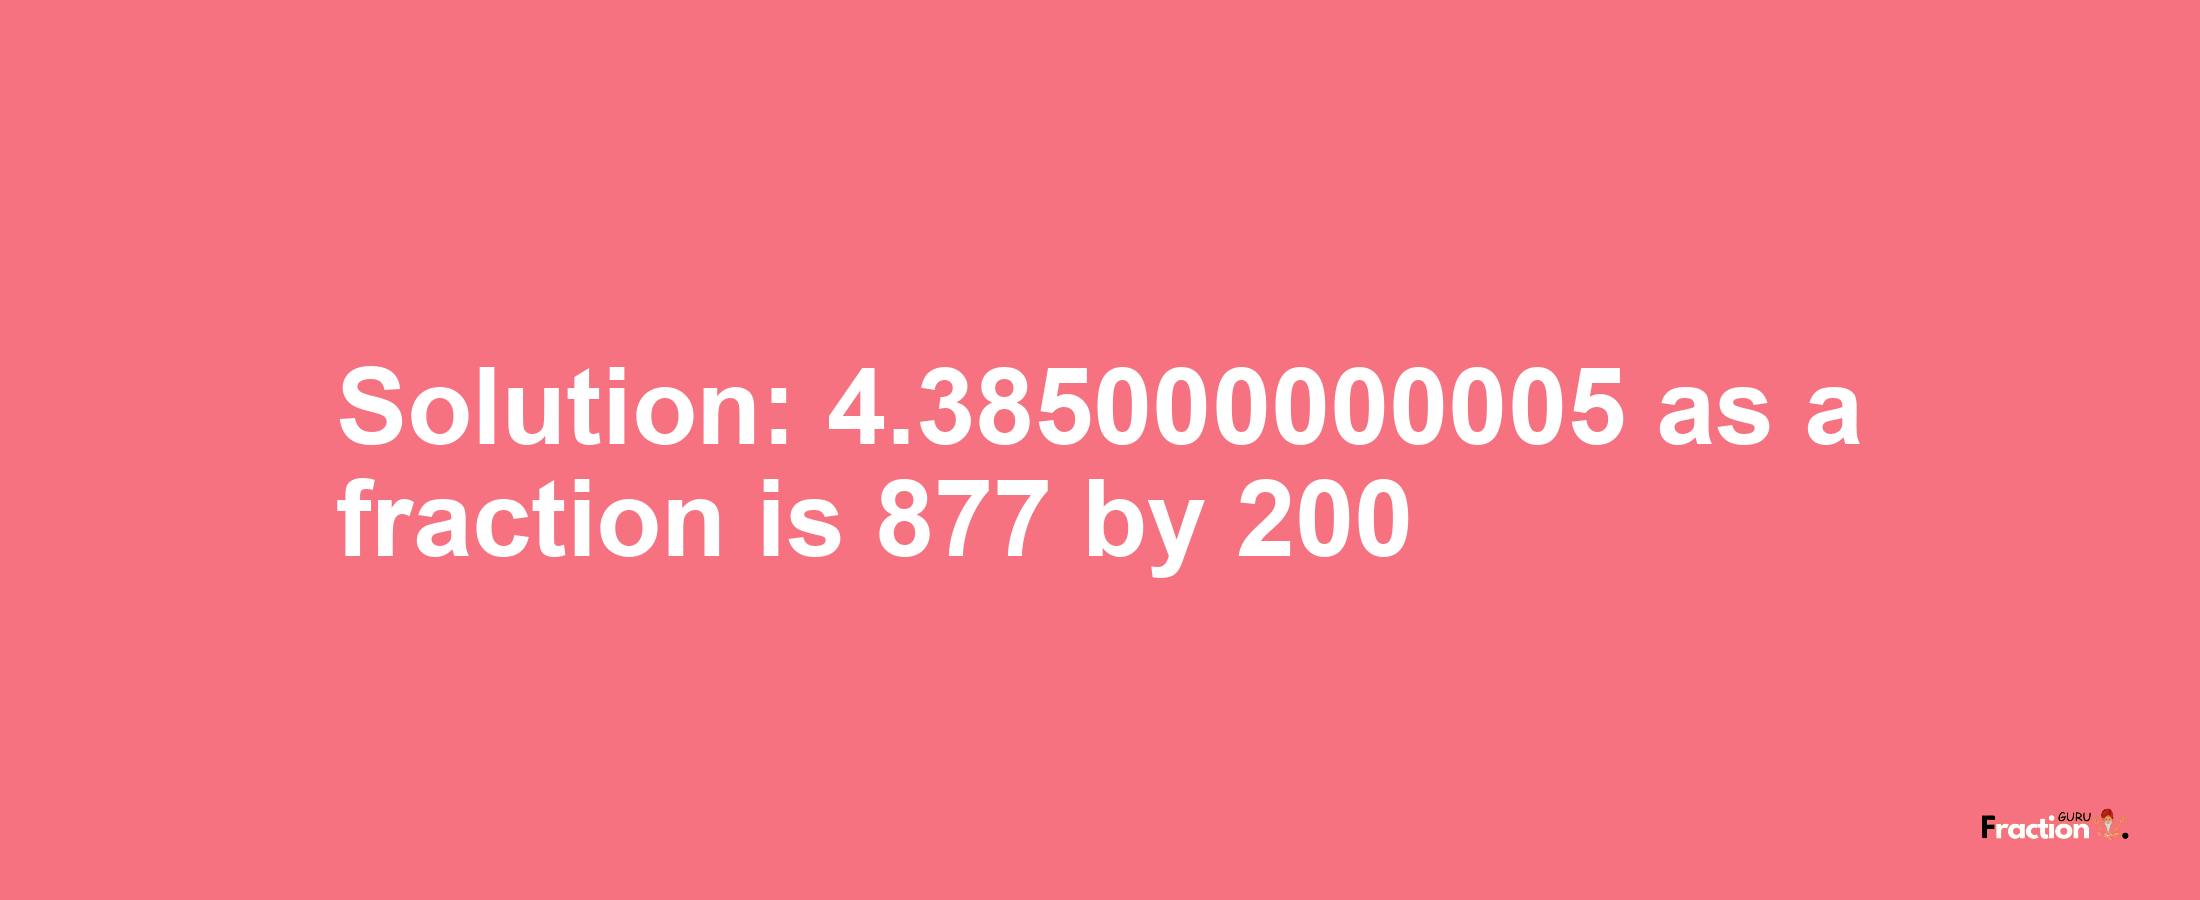 Solution:4.385000000005 as a fraction is 877/200